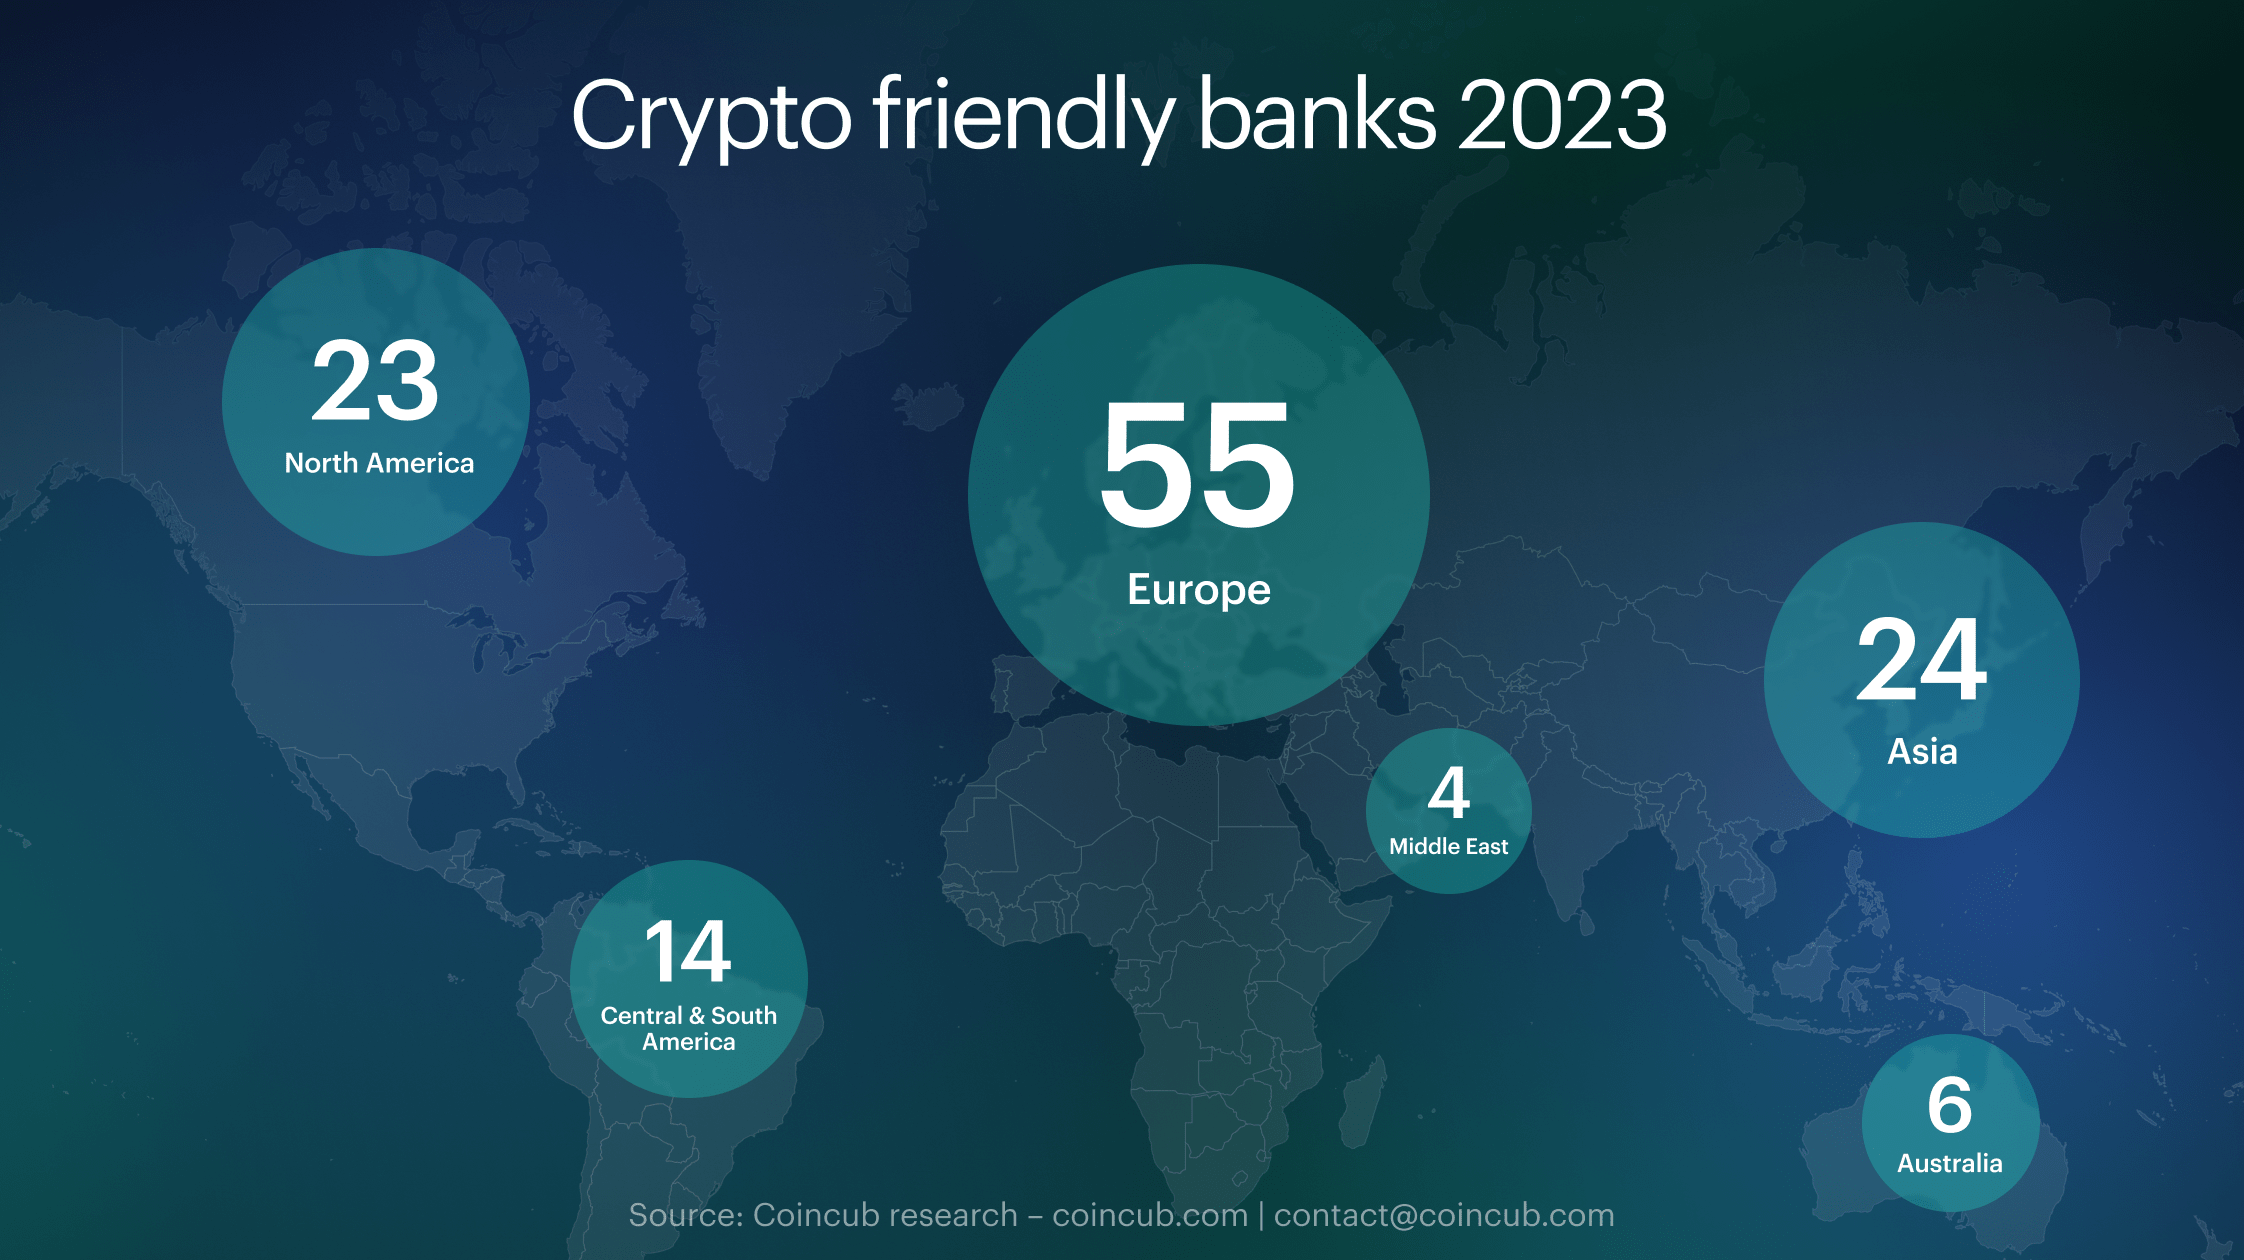 Crypto Banking Report: Europe is the world’s most crypto-friendly region with 55 banks supporting the industry 